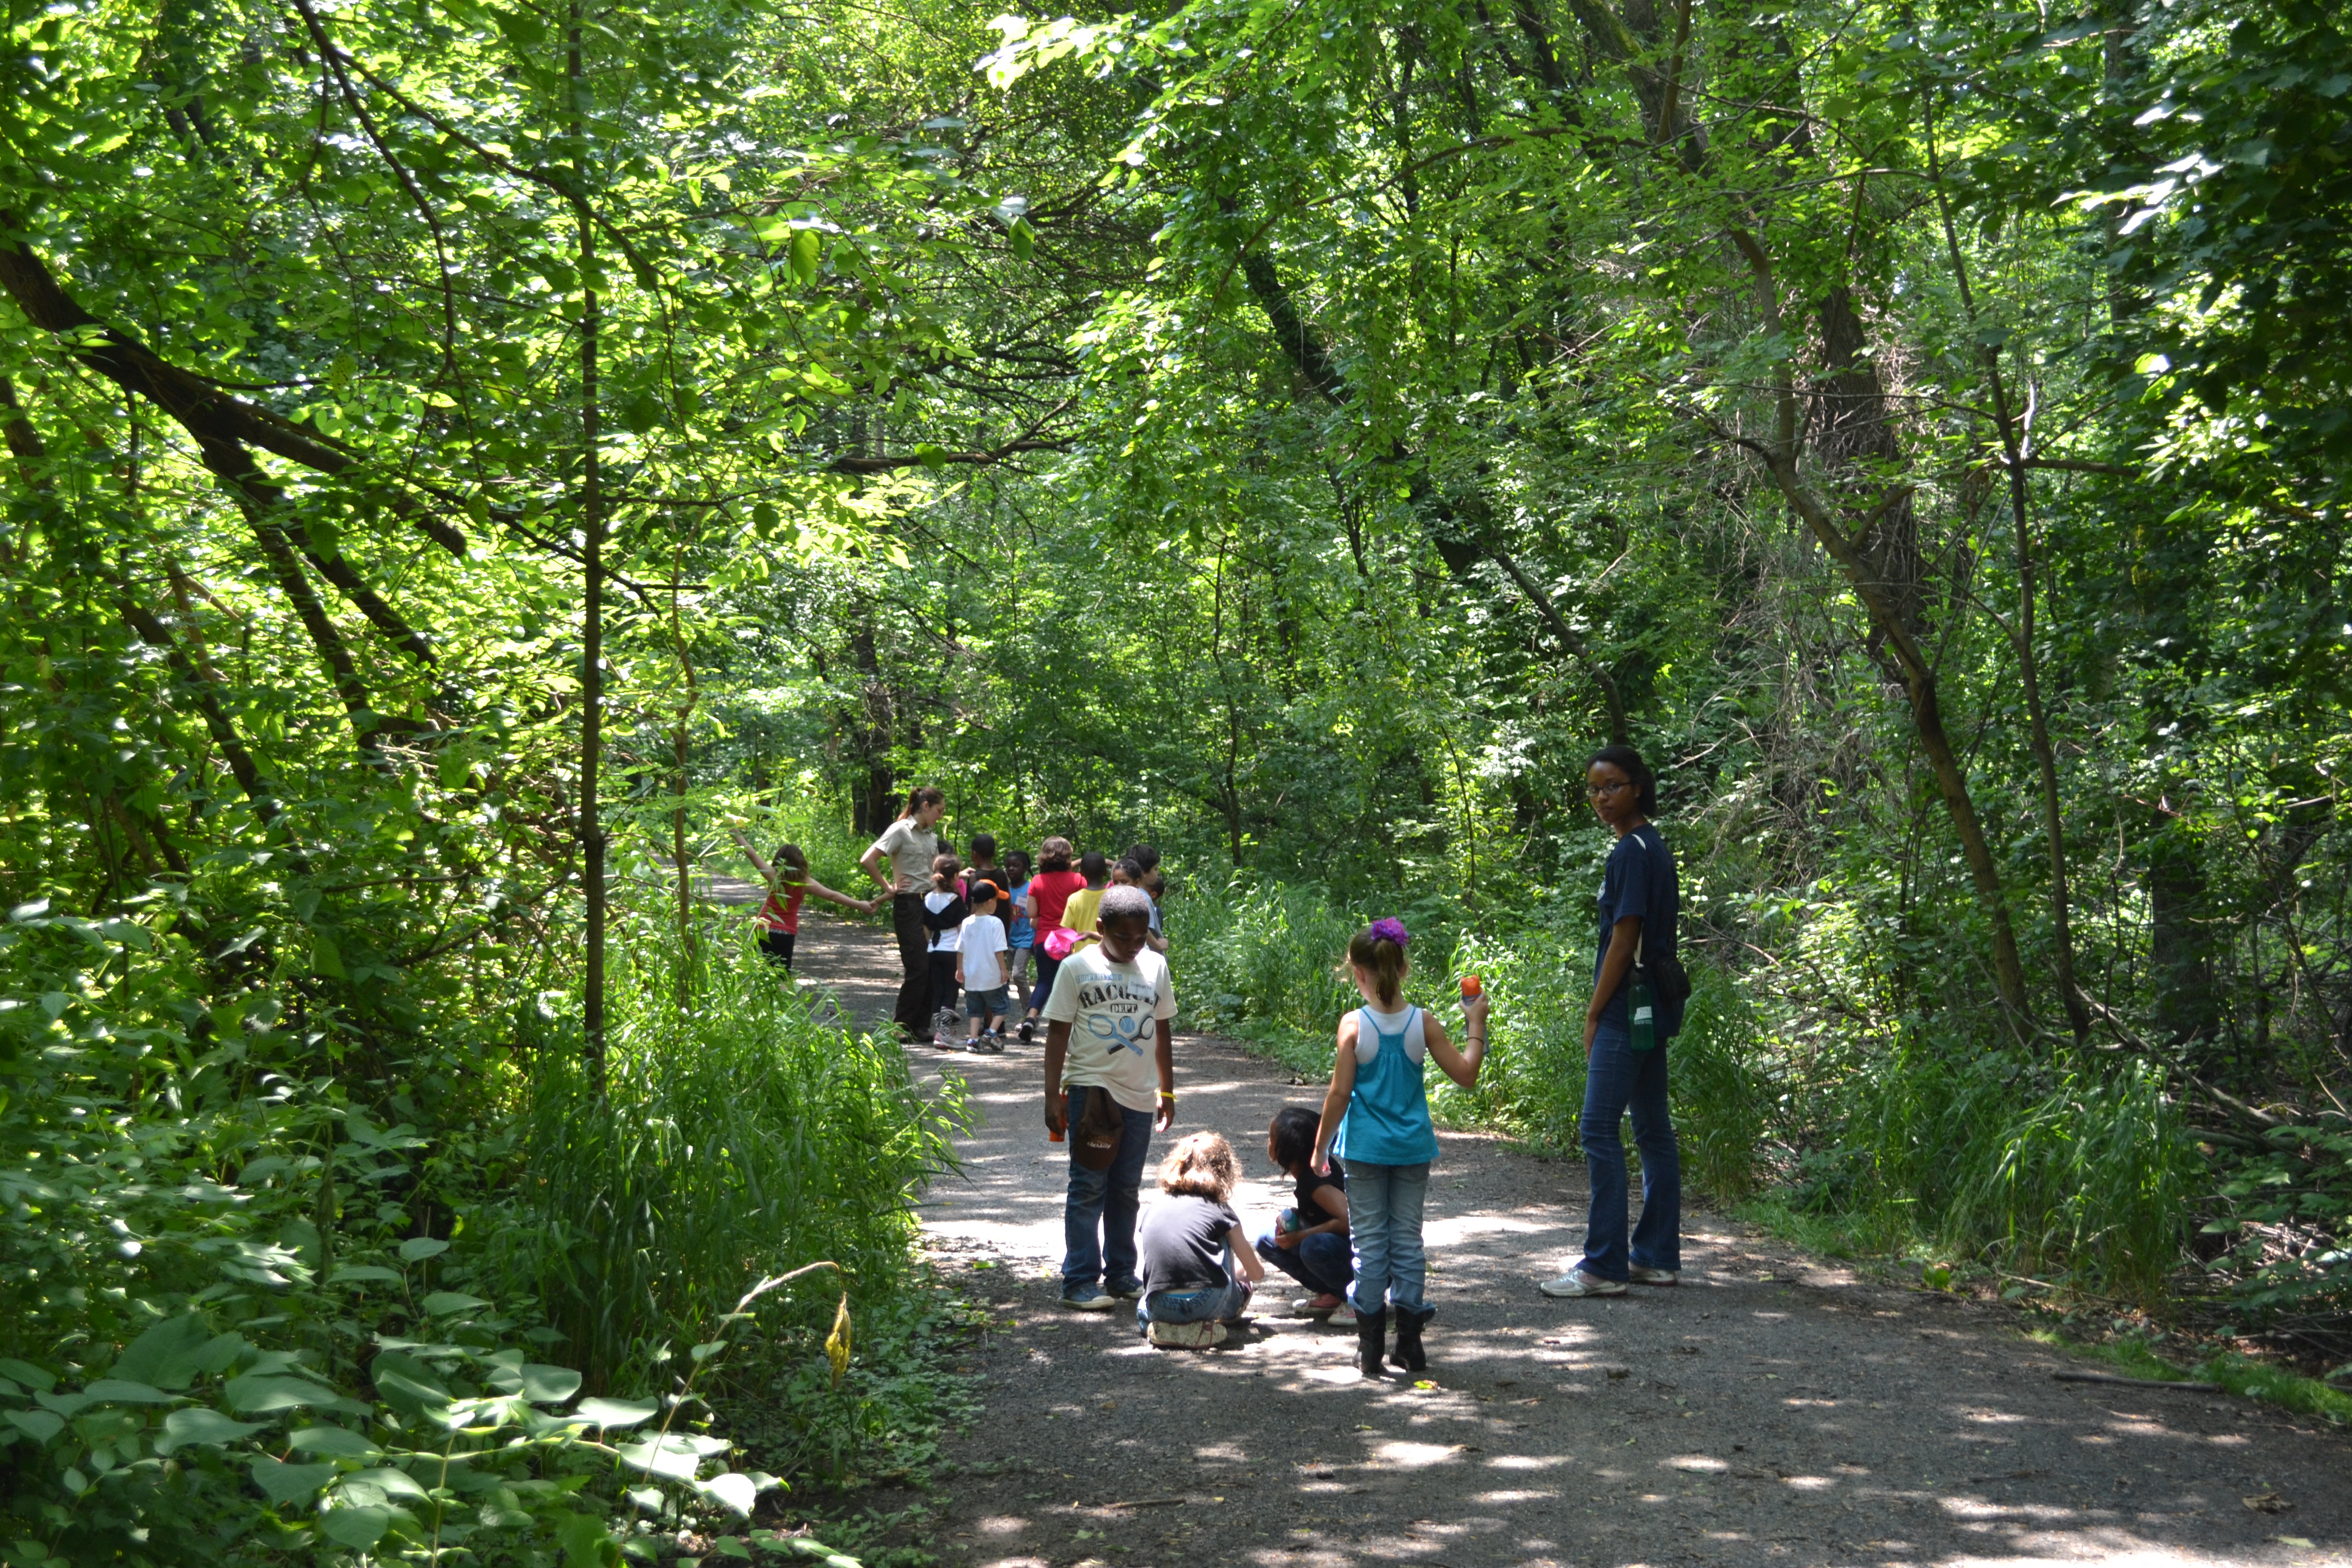 Students at the John Heinz day camp headed out for a nature walk